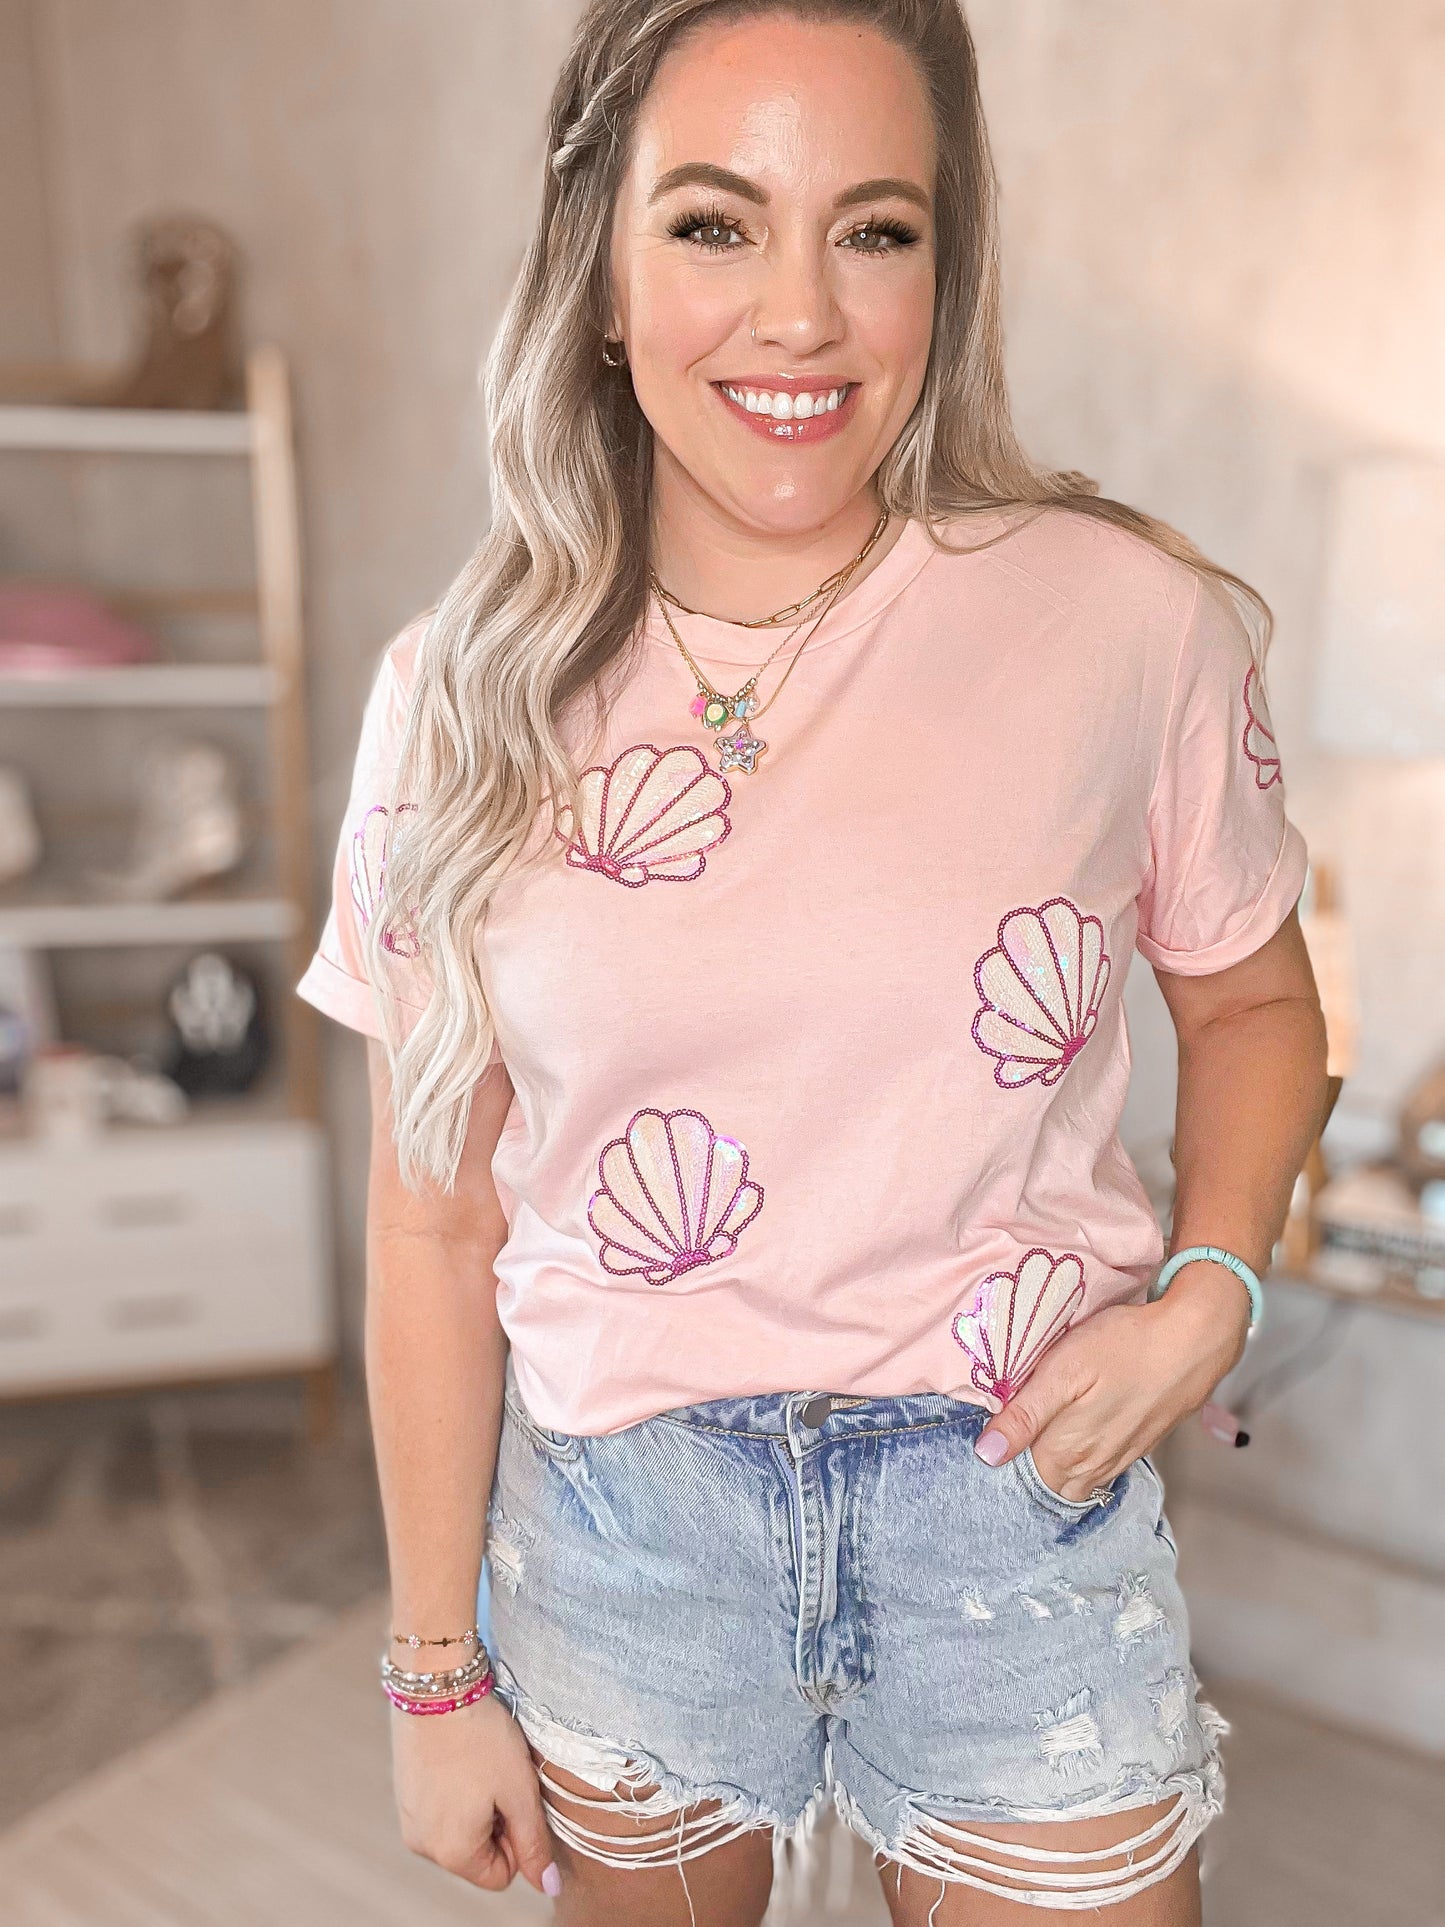 She Sells Seashells Sequin Tee - Cheeky Chic Boutique